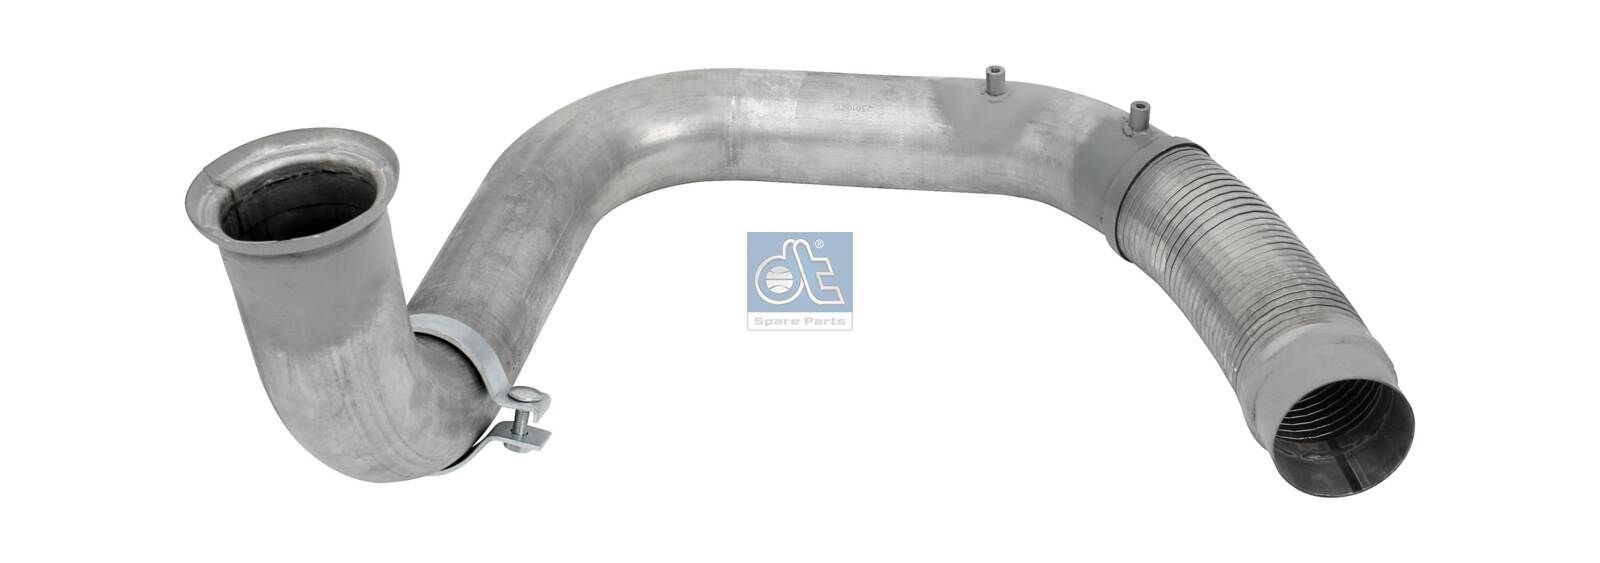 Mercedes T2 Exhaust pipes 7336743 DT Spare Parts 4.64327 online buy